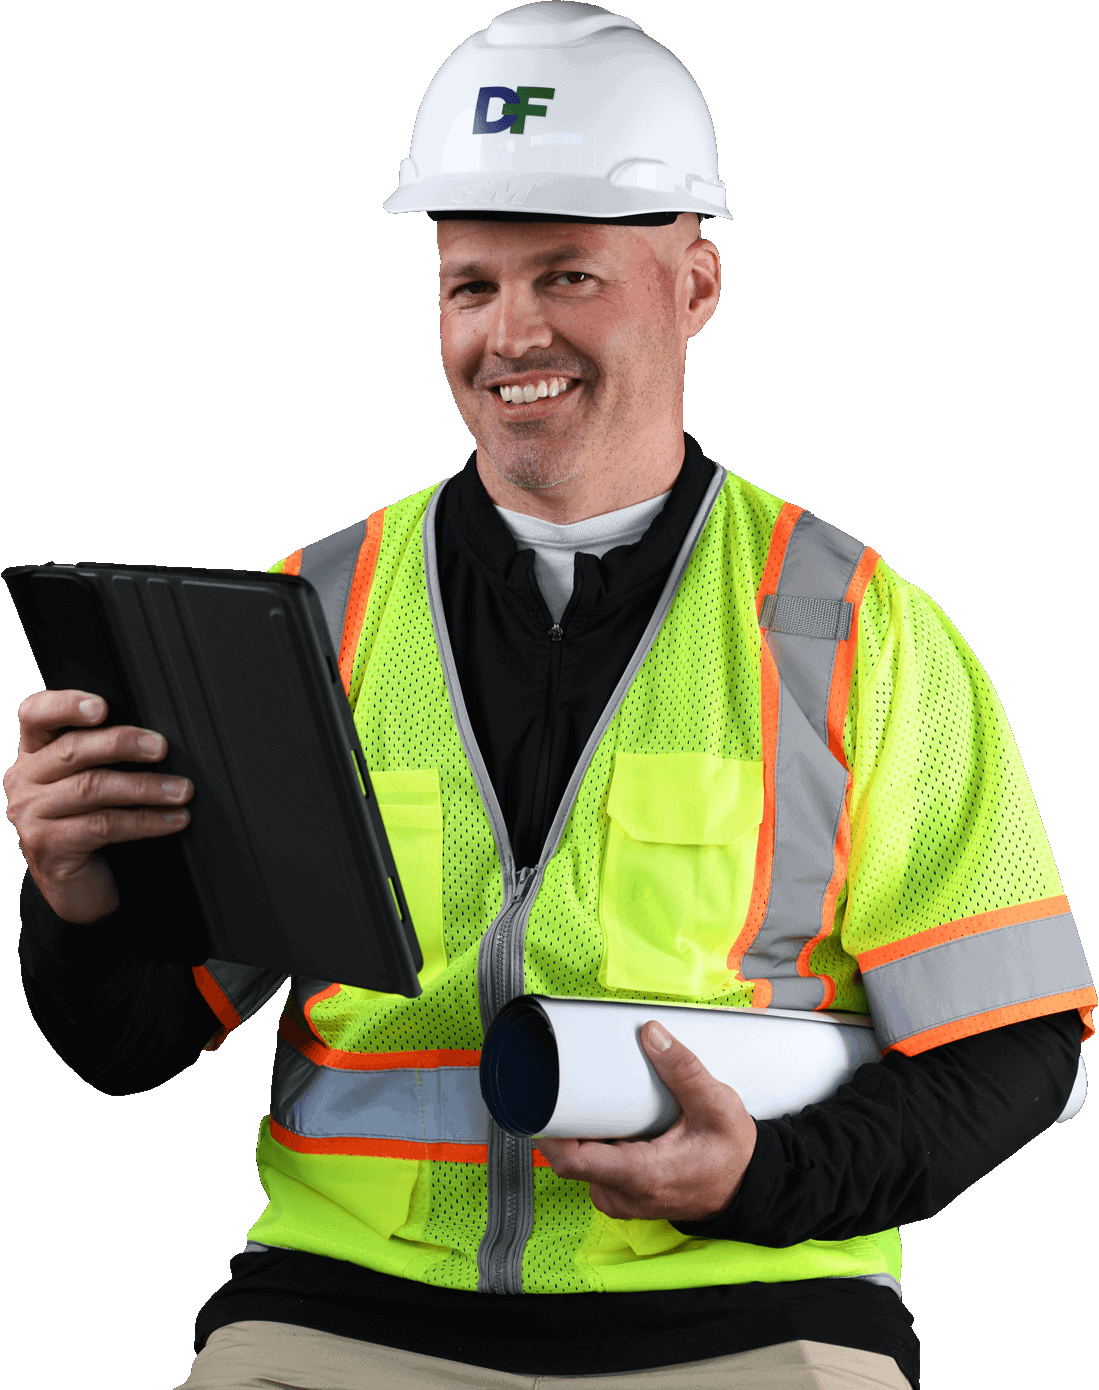 Man smiling, symbolizing Datafield Technology Services, embodying the persona of 'field guy,' complementing the page's theme.